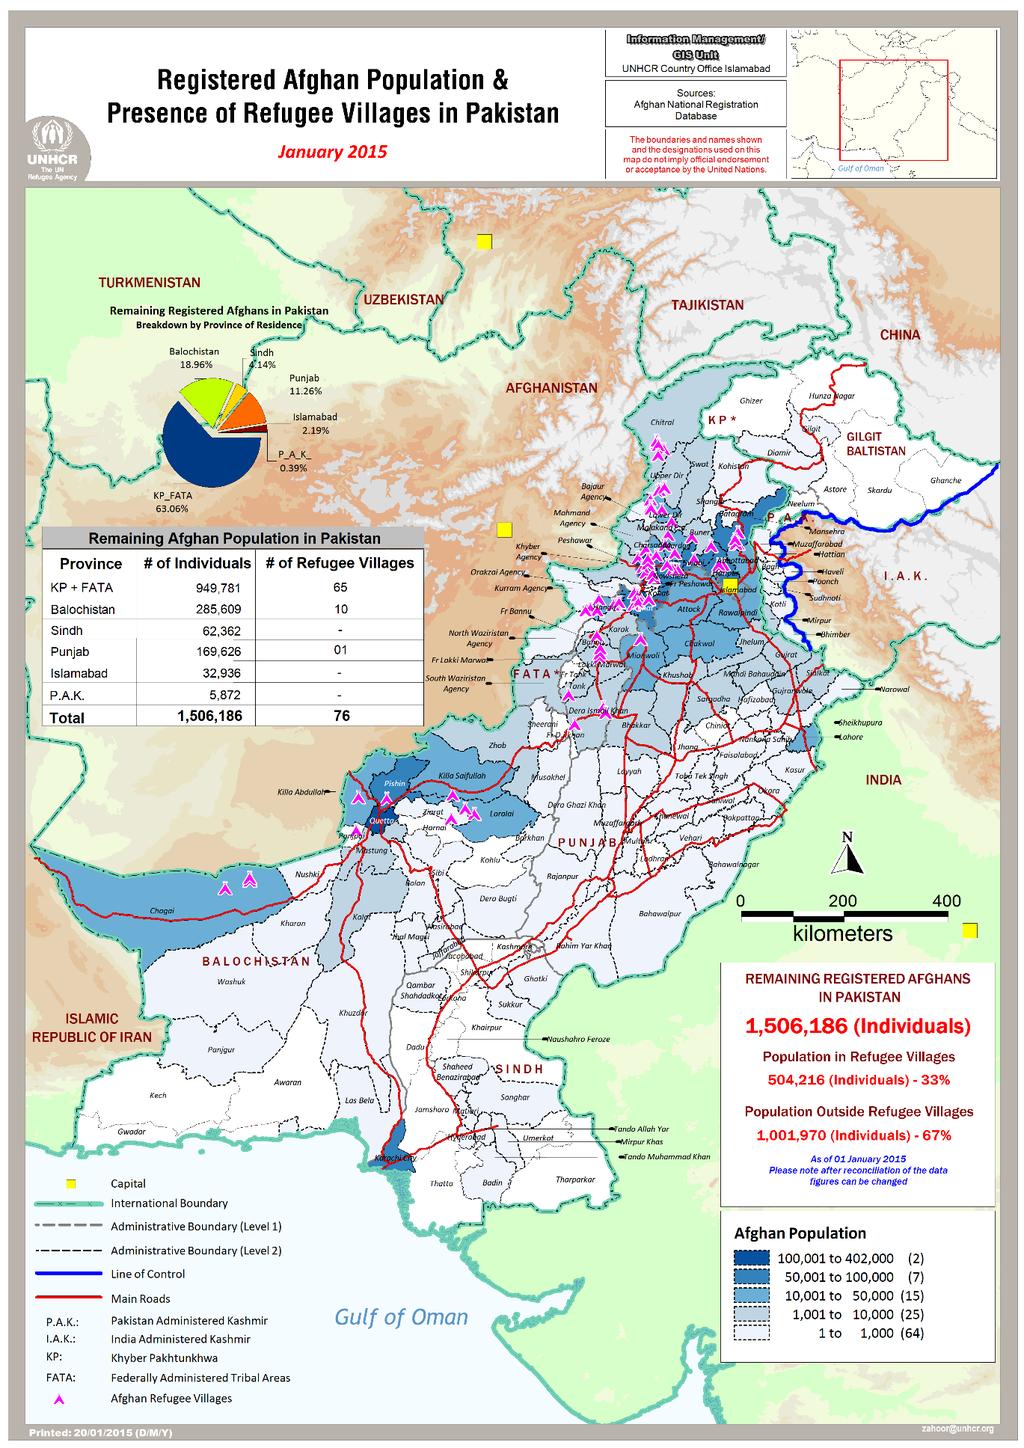 STRATEGIC PLAN - INTERNAL DOCUMENT - Pakistan Source: UNHCR The boundaries and names shown and the designations used on this map do not imply official endorsement or acceptance by the United Nations.